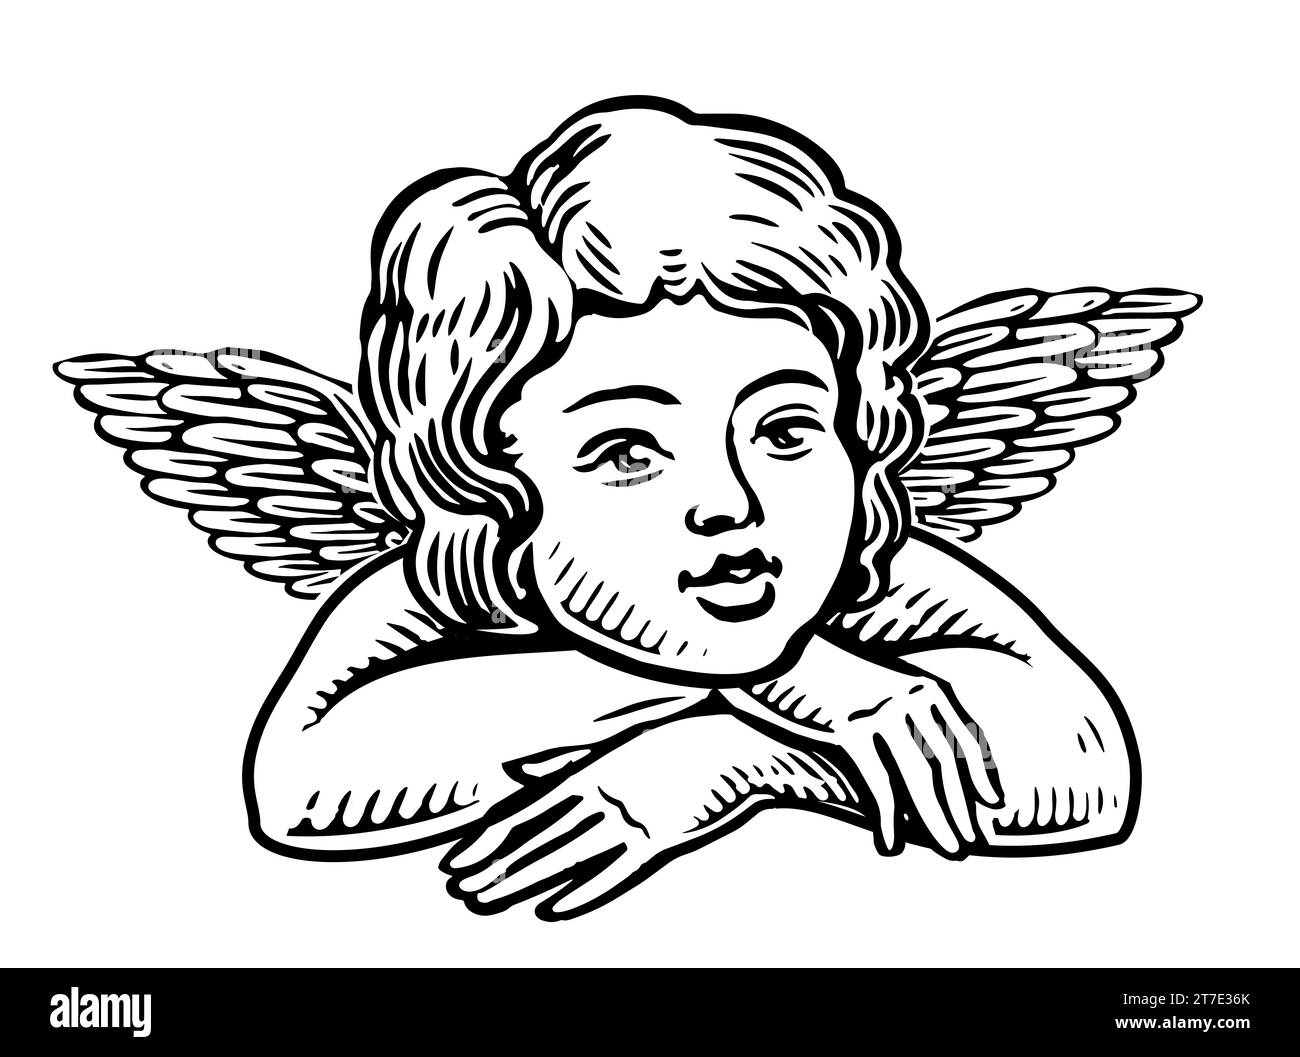 Cute baby with wings. Hand drawn little angel. Sketch vintage illustration Stock Photo